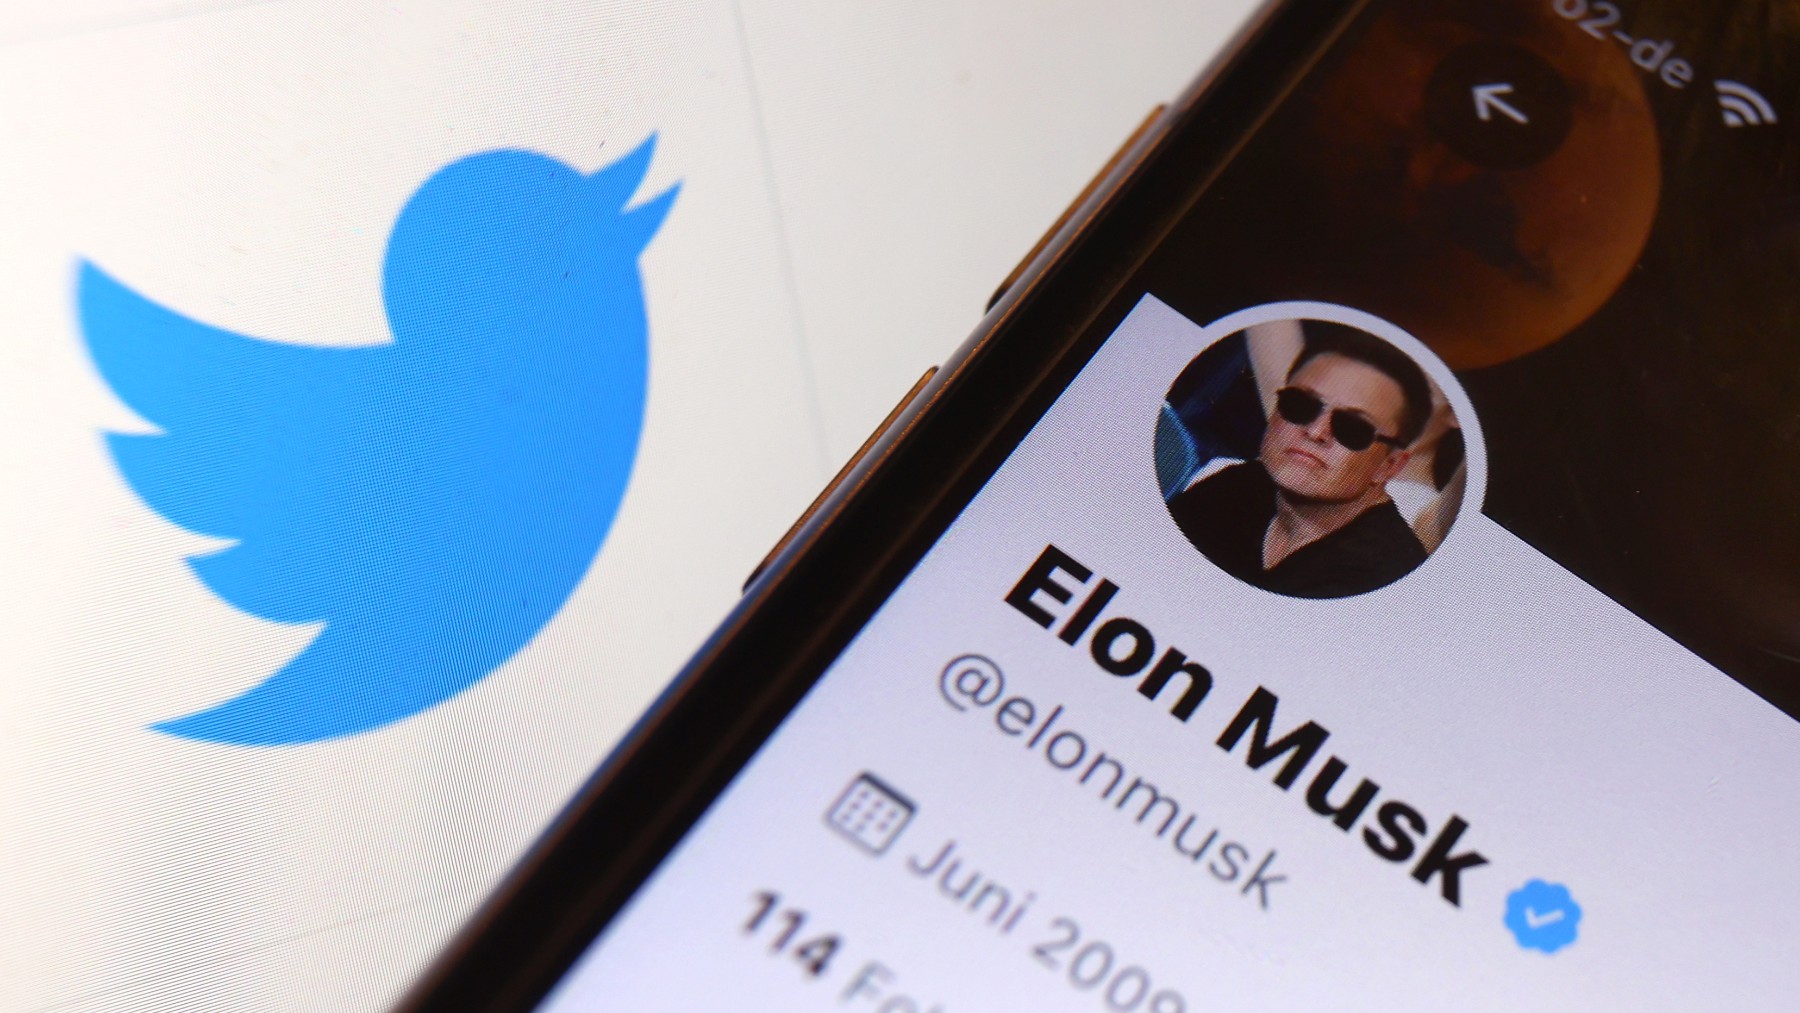 Elon Musk announces that he is leaving his position as CEO of Twitter to a woman but does not say who she is